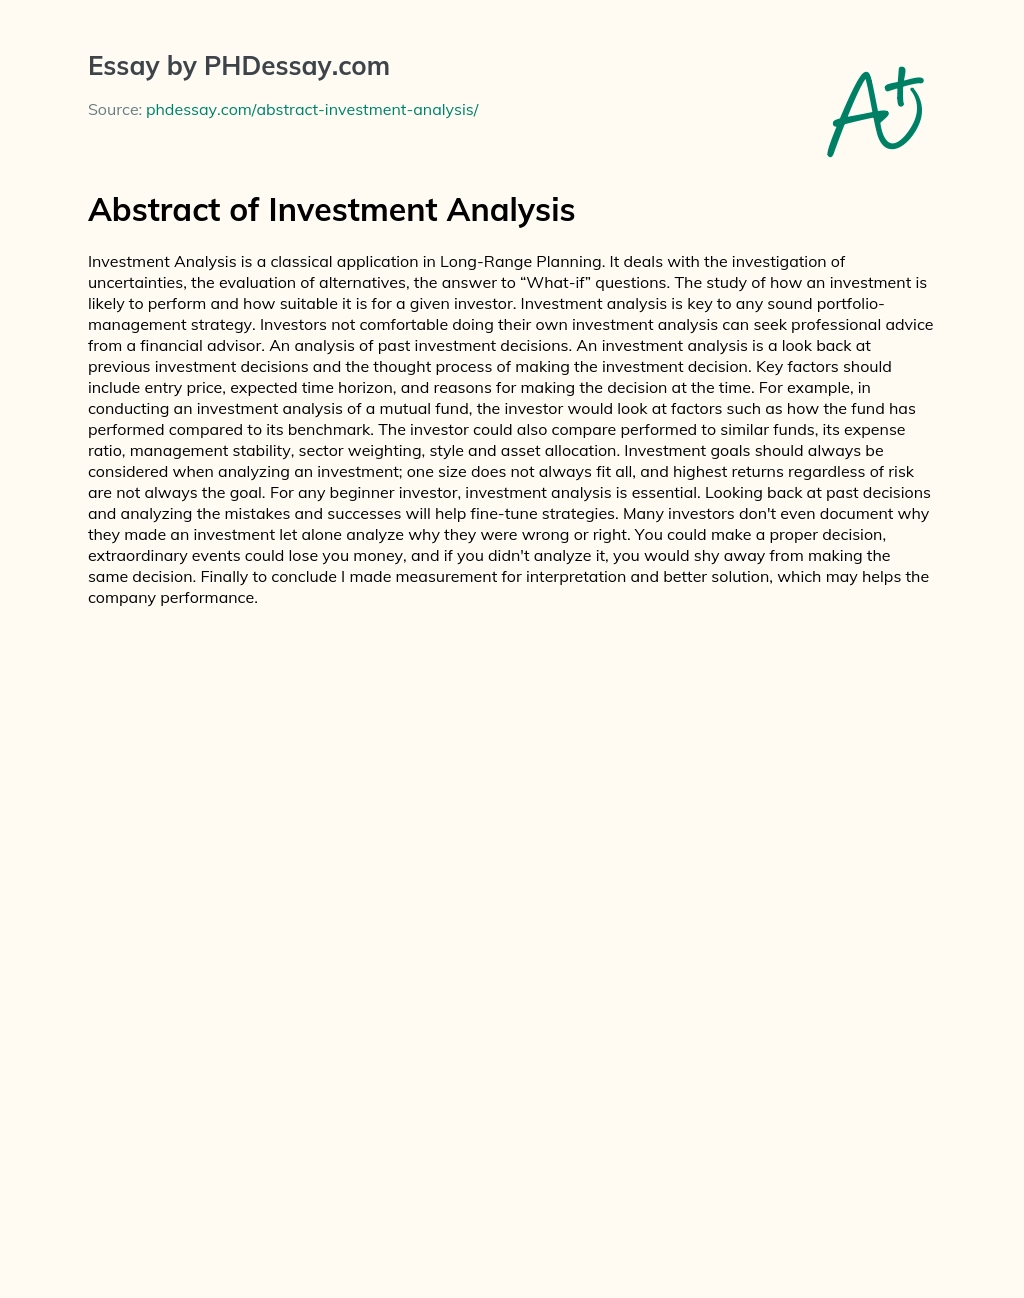 Abstract of Investment Analysis essay